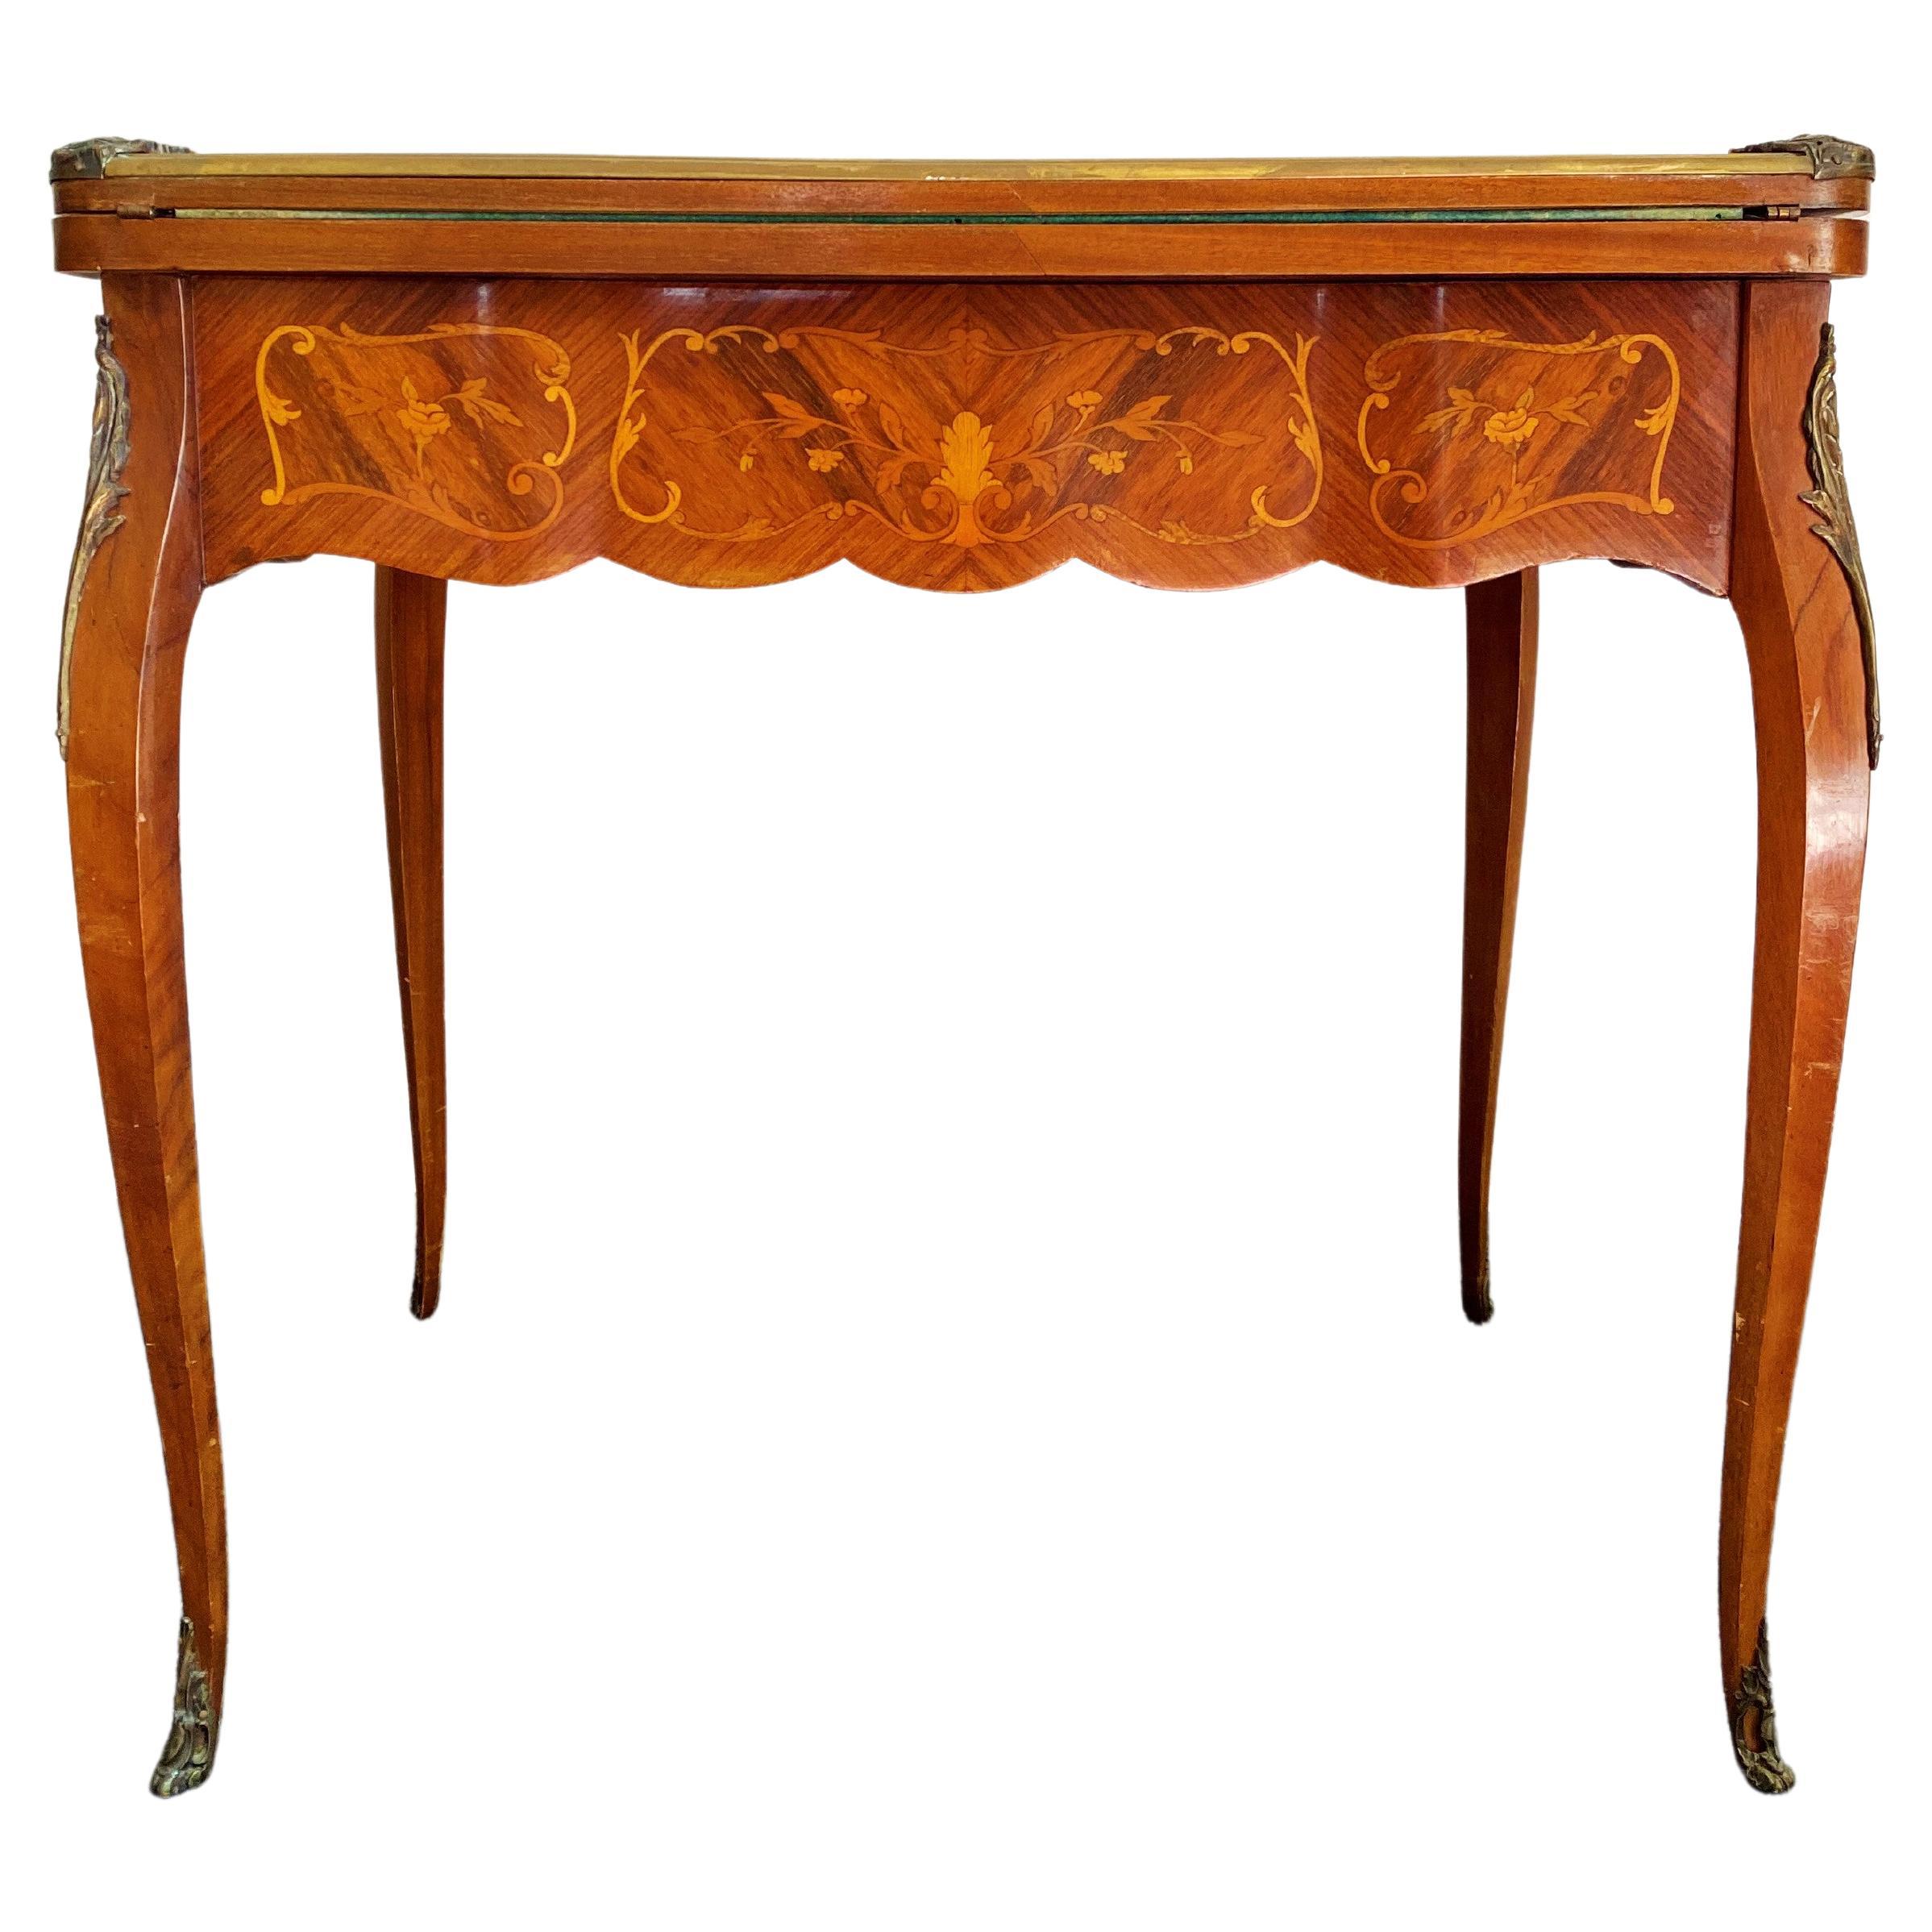 French Game Table Napoleon III Period - Louis XV Style - 19th Century - France For Sale